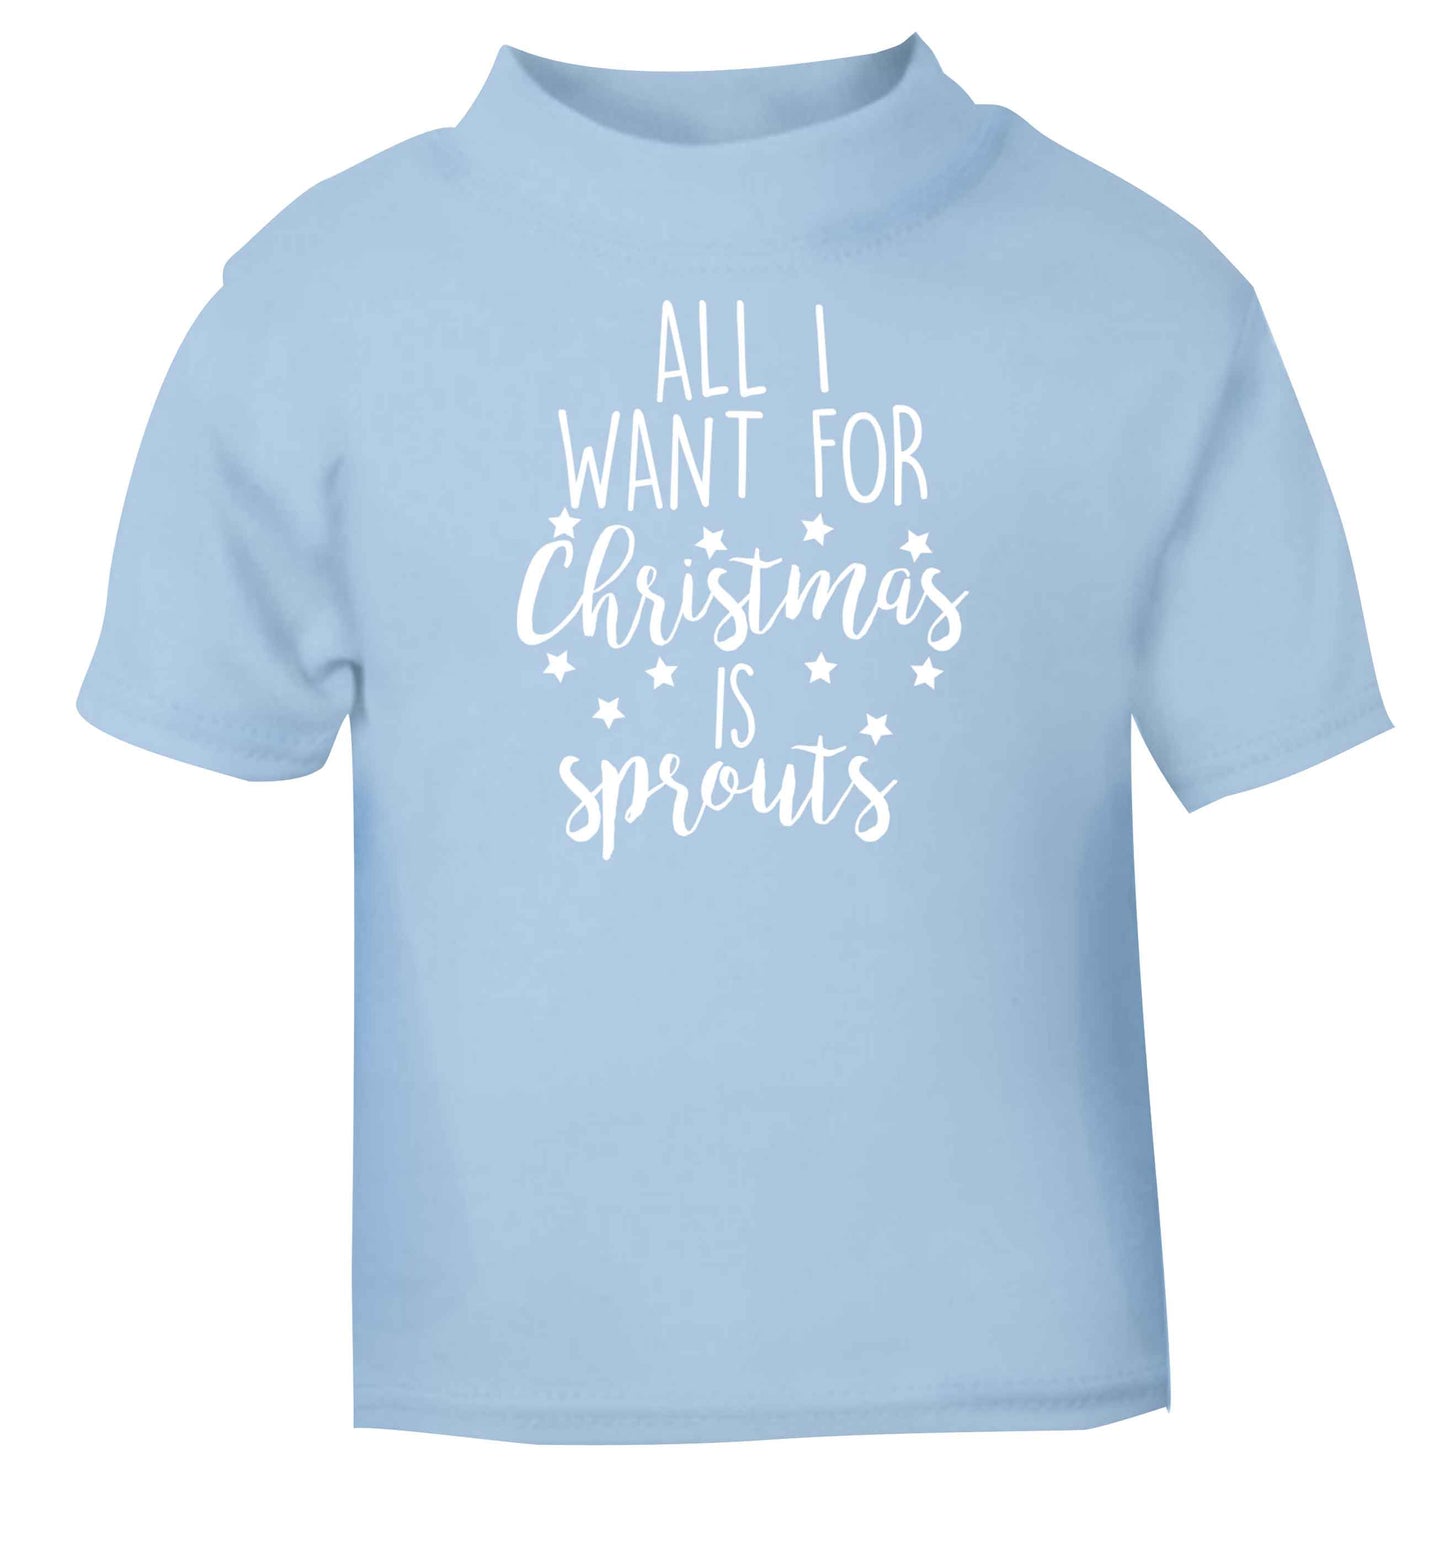 All I want for Christmas is sprouts light blue baby toddler Tshirt 2 Years